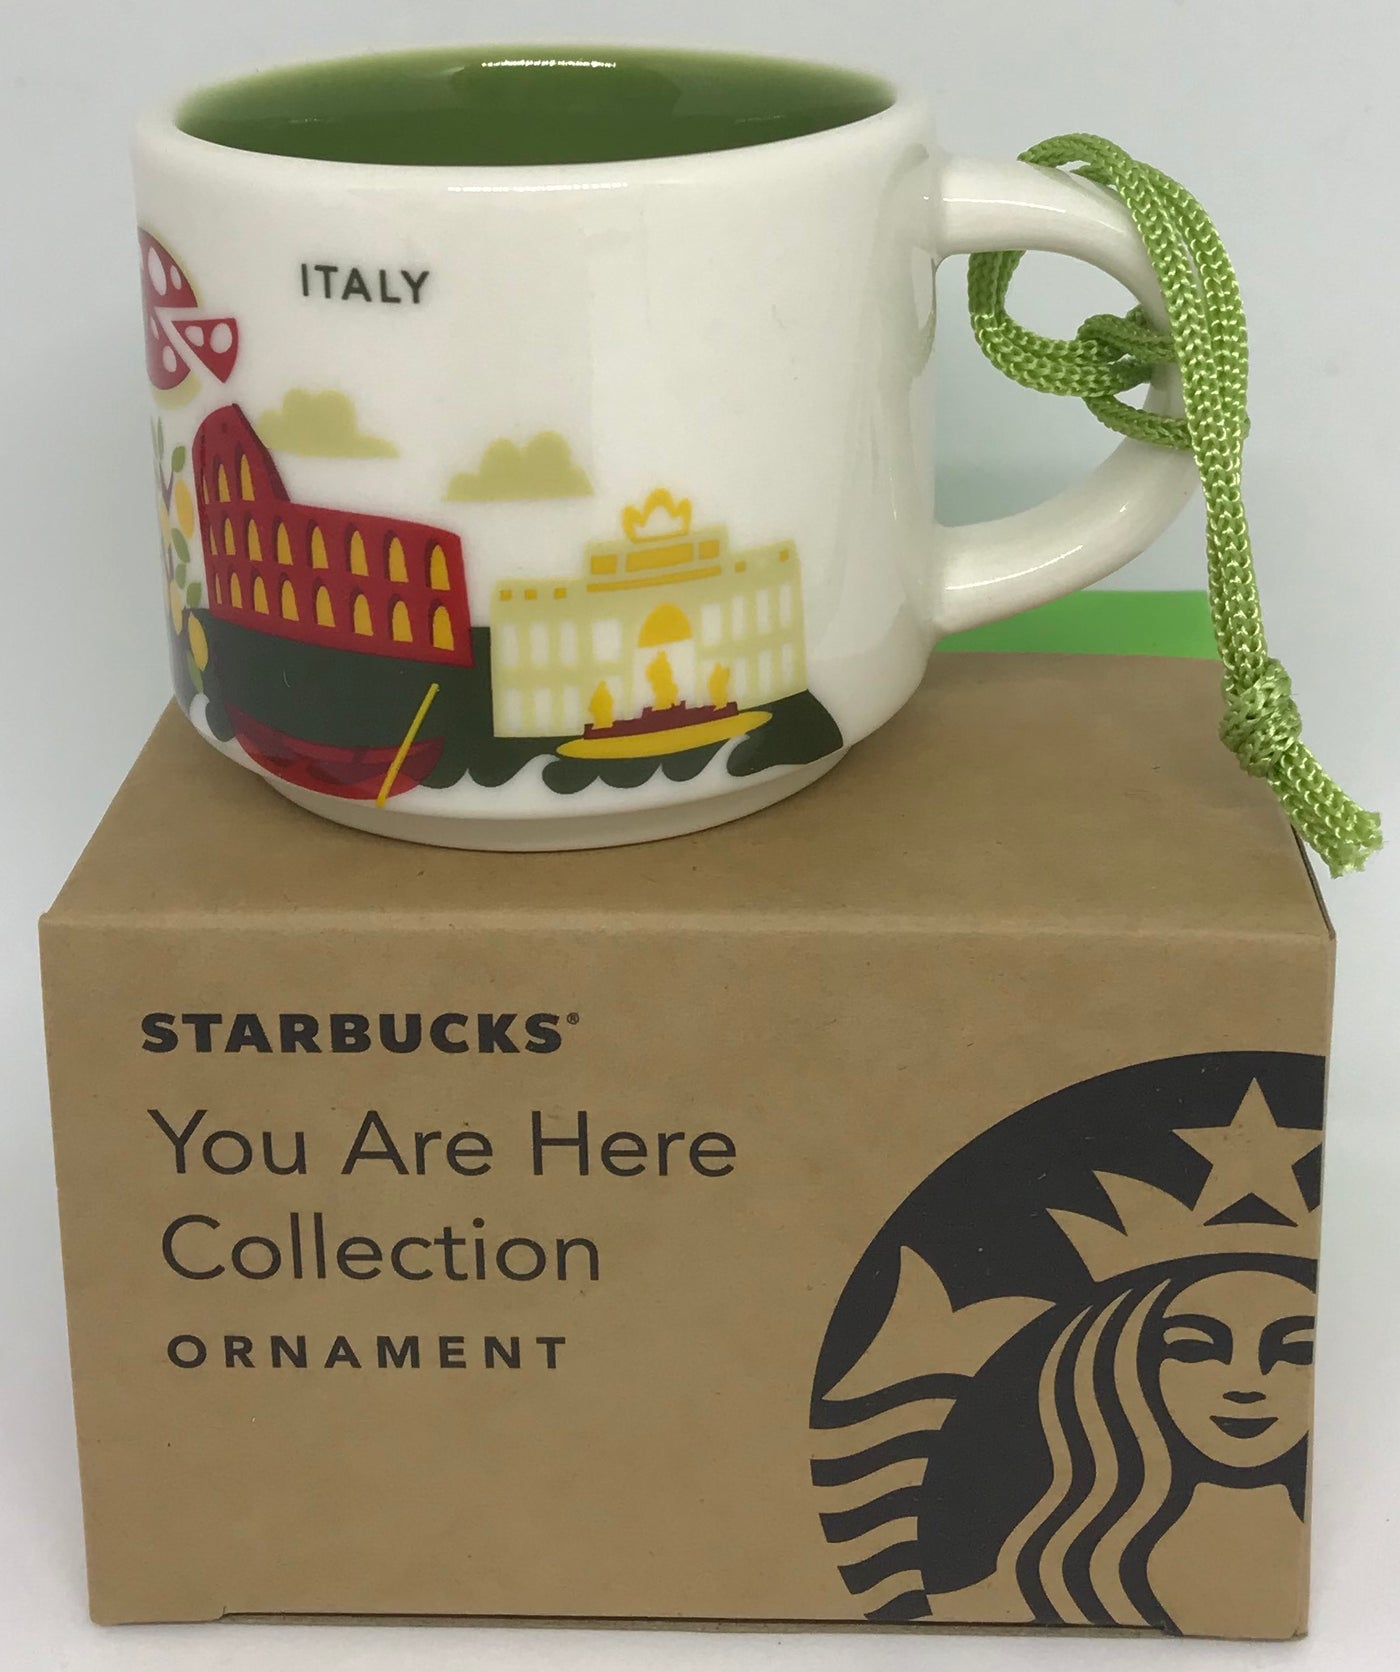 Starbucks Coffee You Are Here Italy Ceramic Mug Ornament New with Box